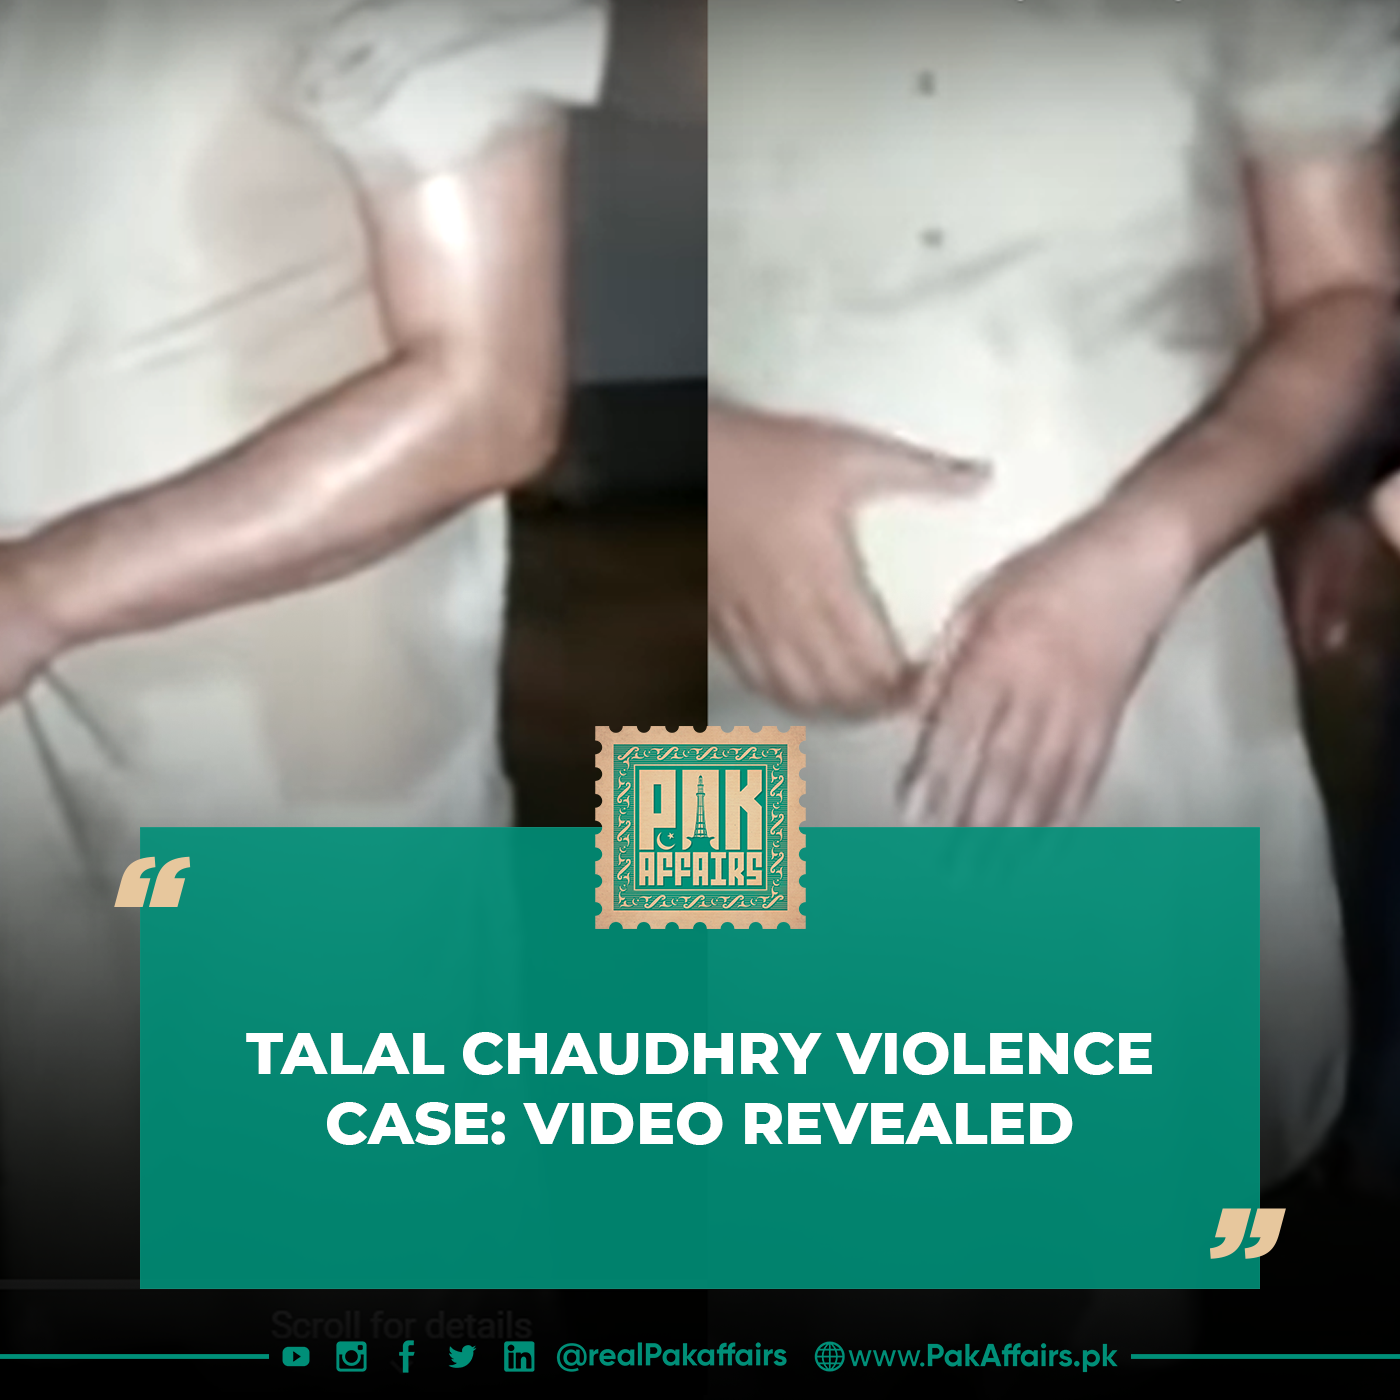 Talal Chaudhry Violence Case: Video Revealed